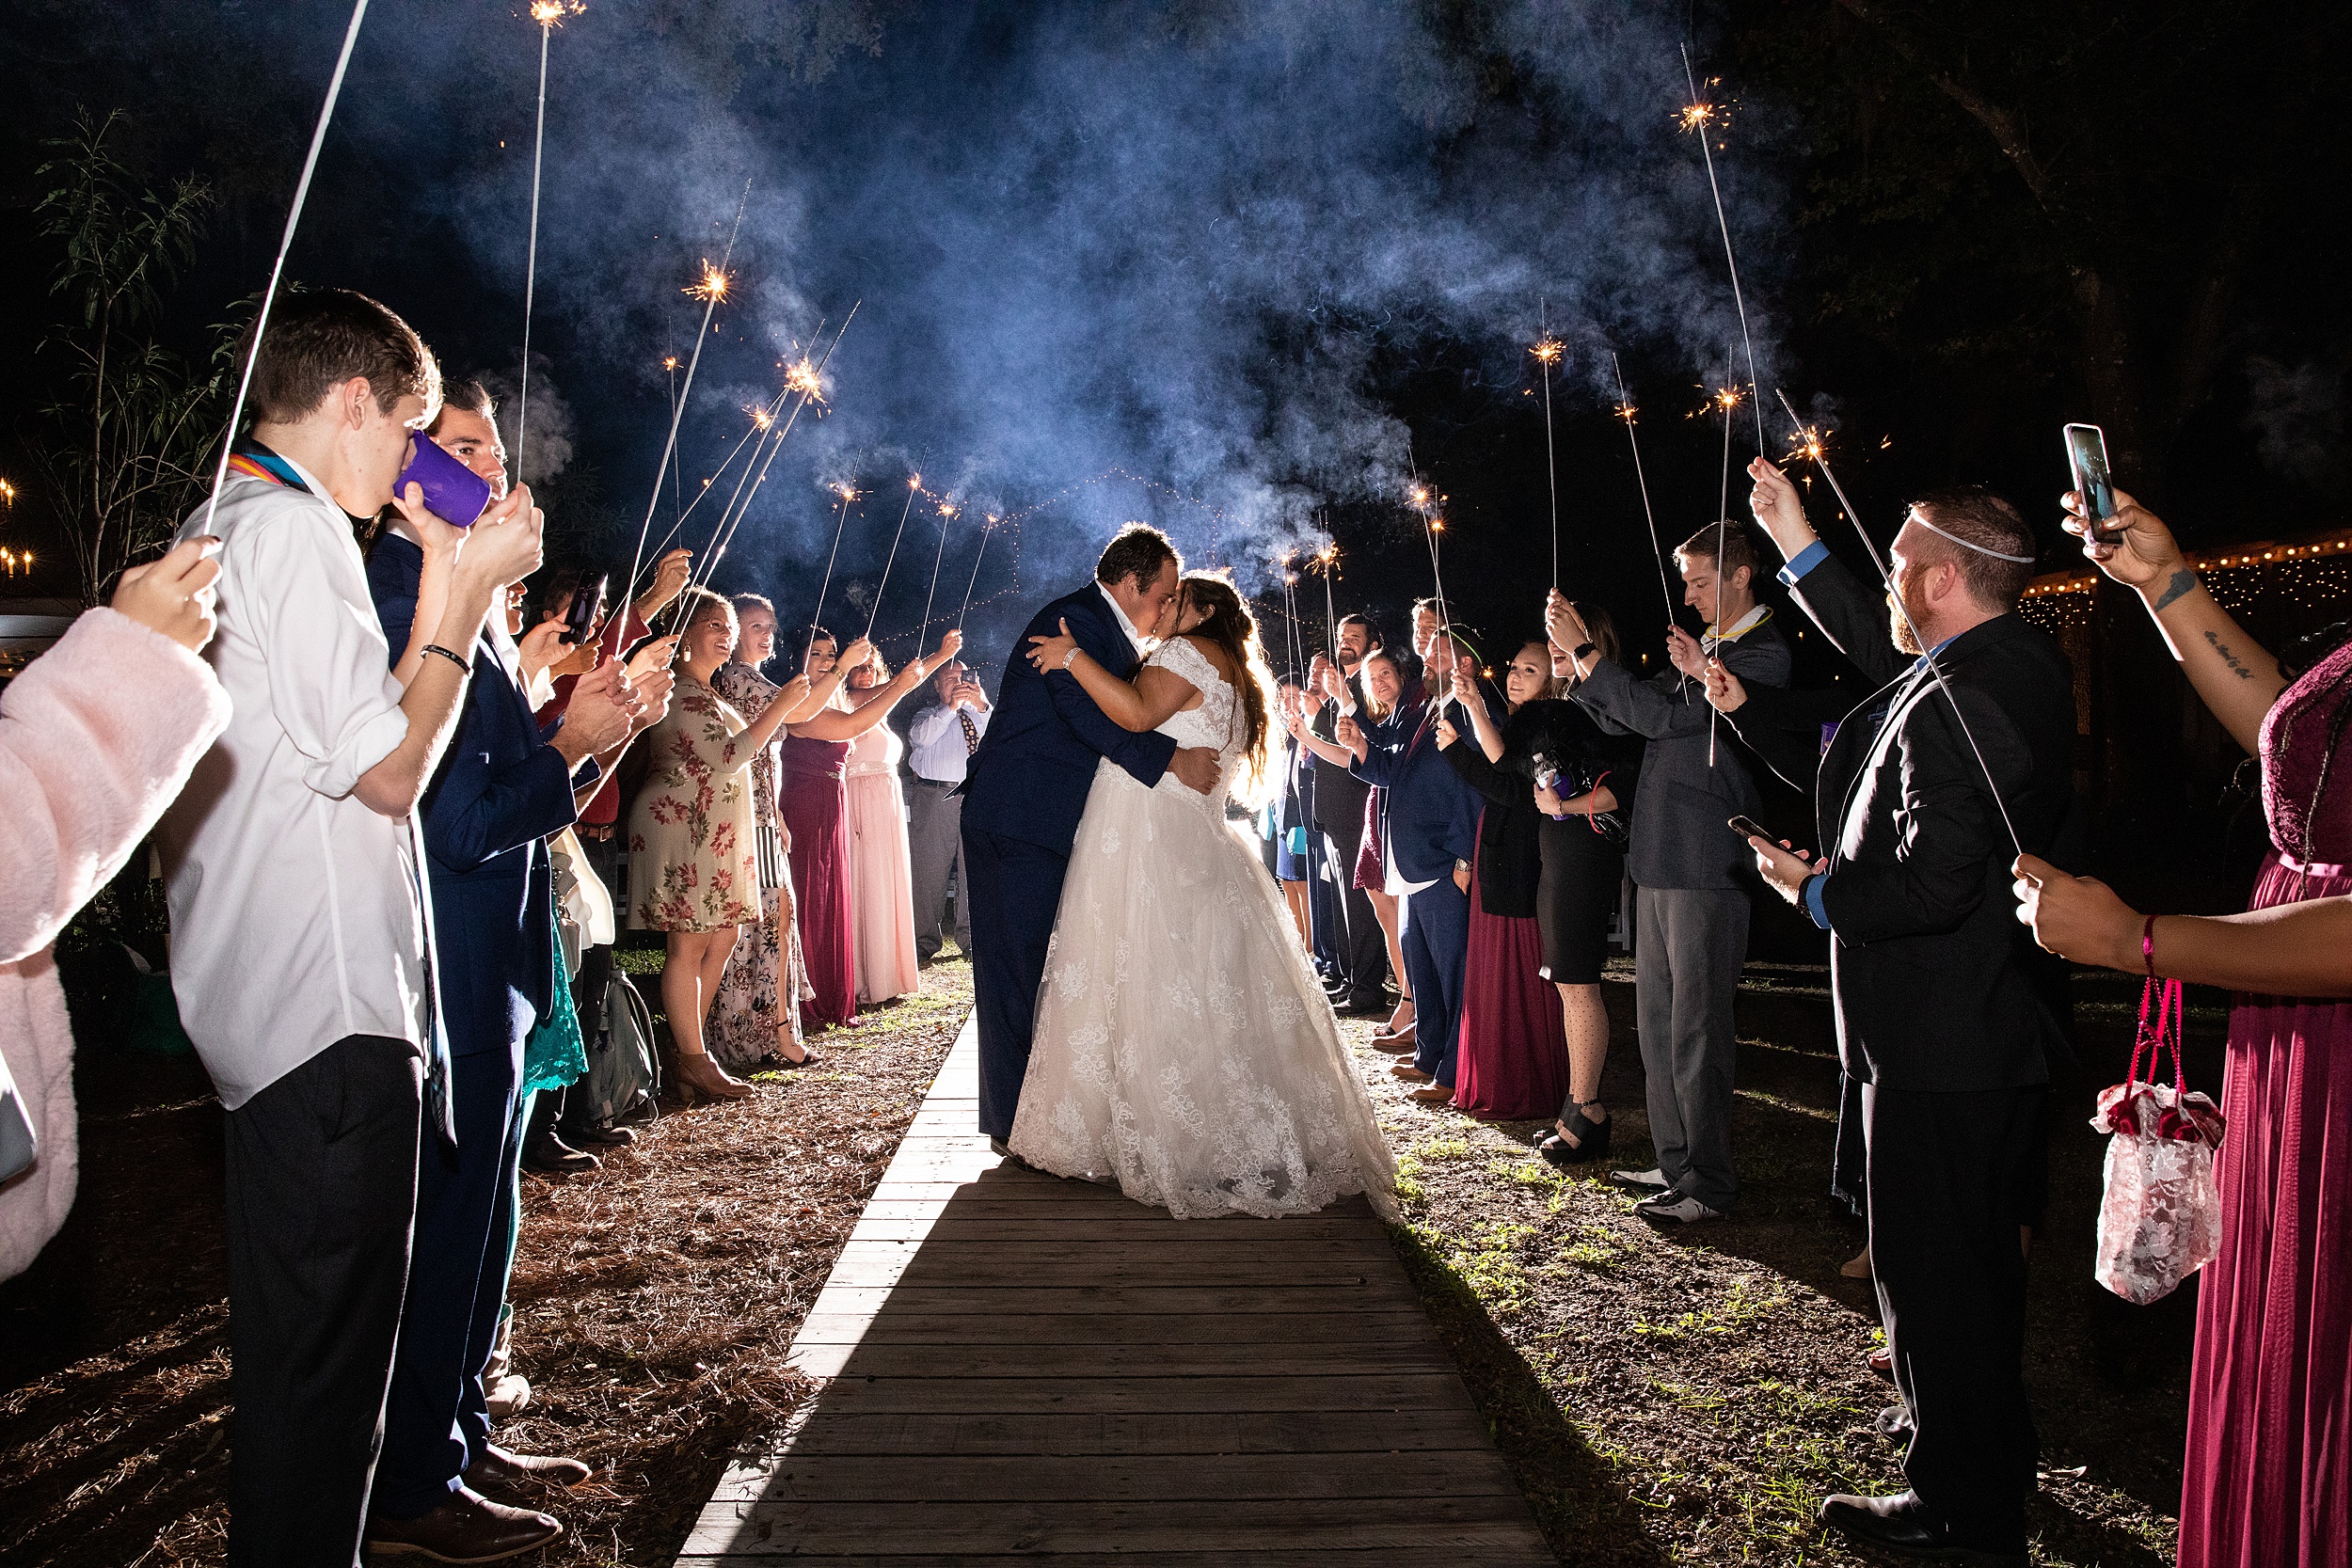 Newlyweds kiss while exiting their reception at night surrounded by guests holding sparklers